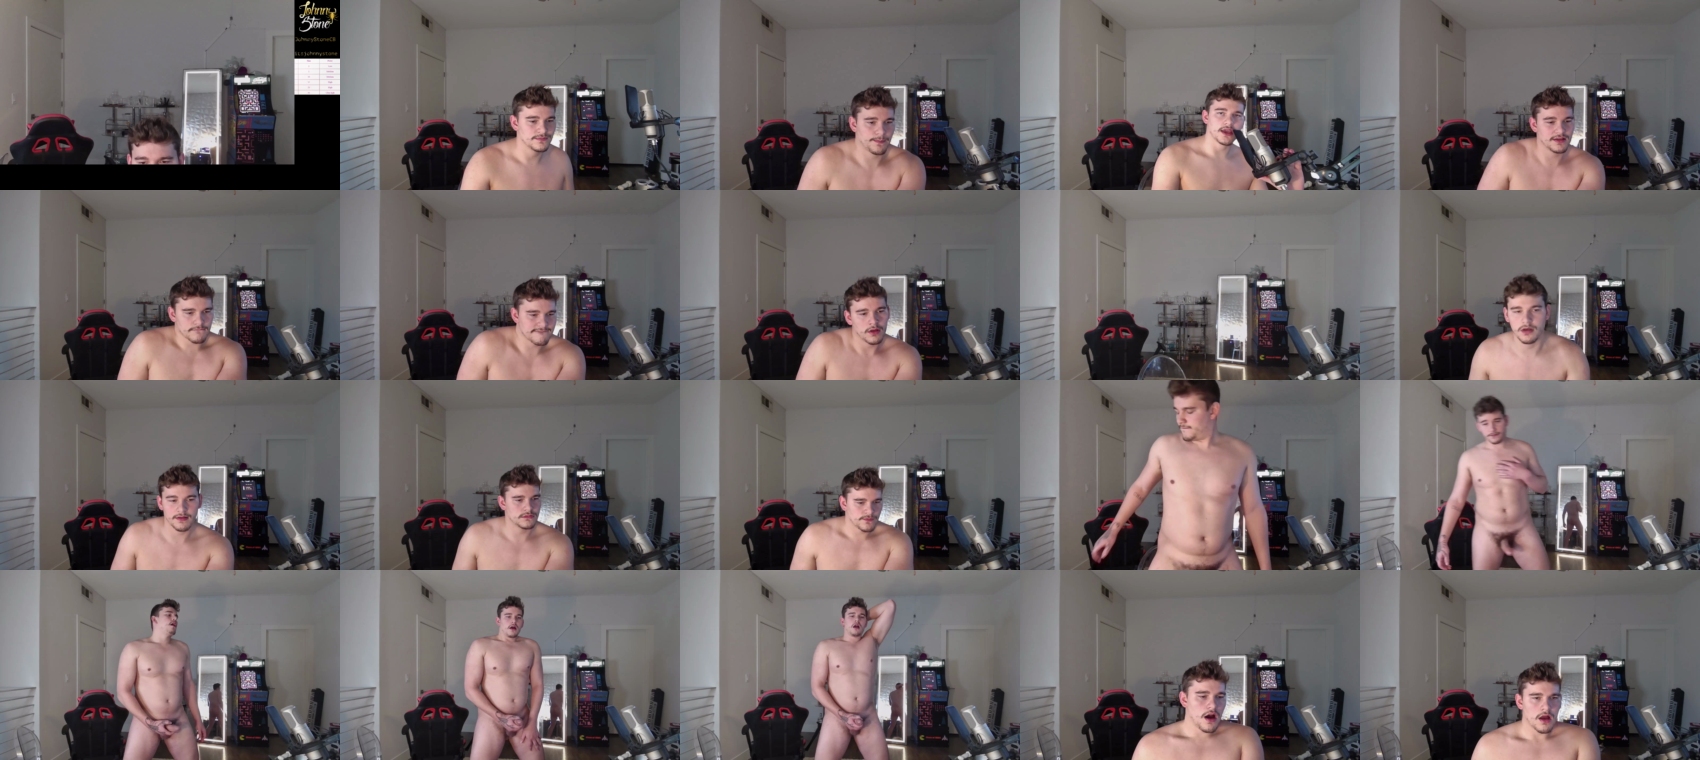 thejohnnystone  23-06-2022 Males Video